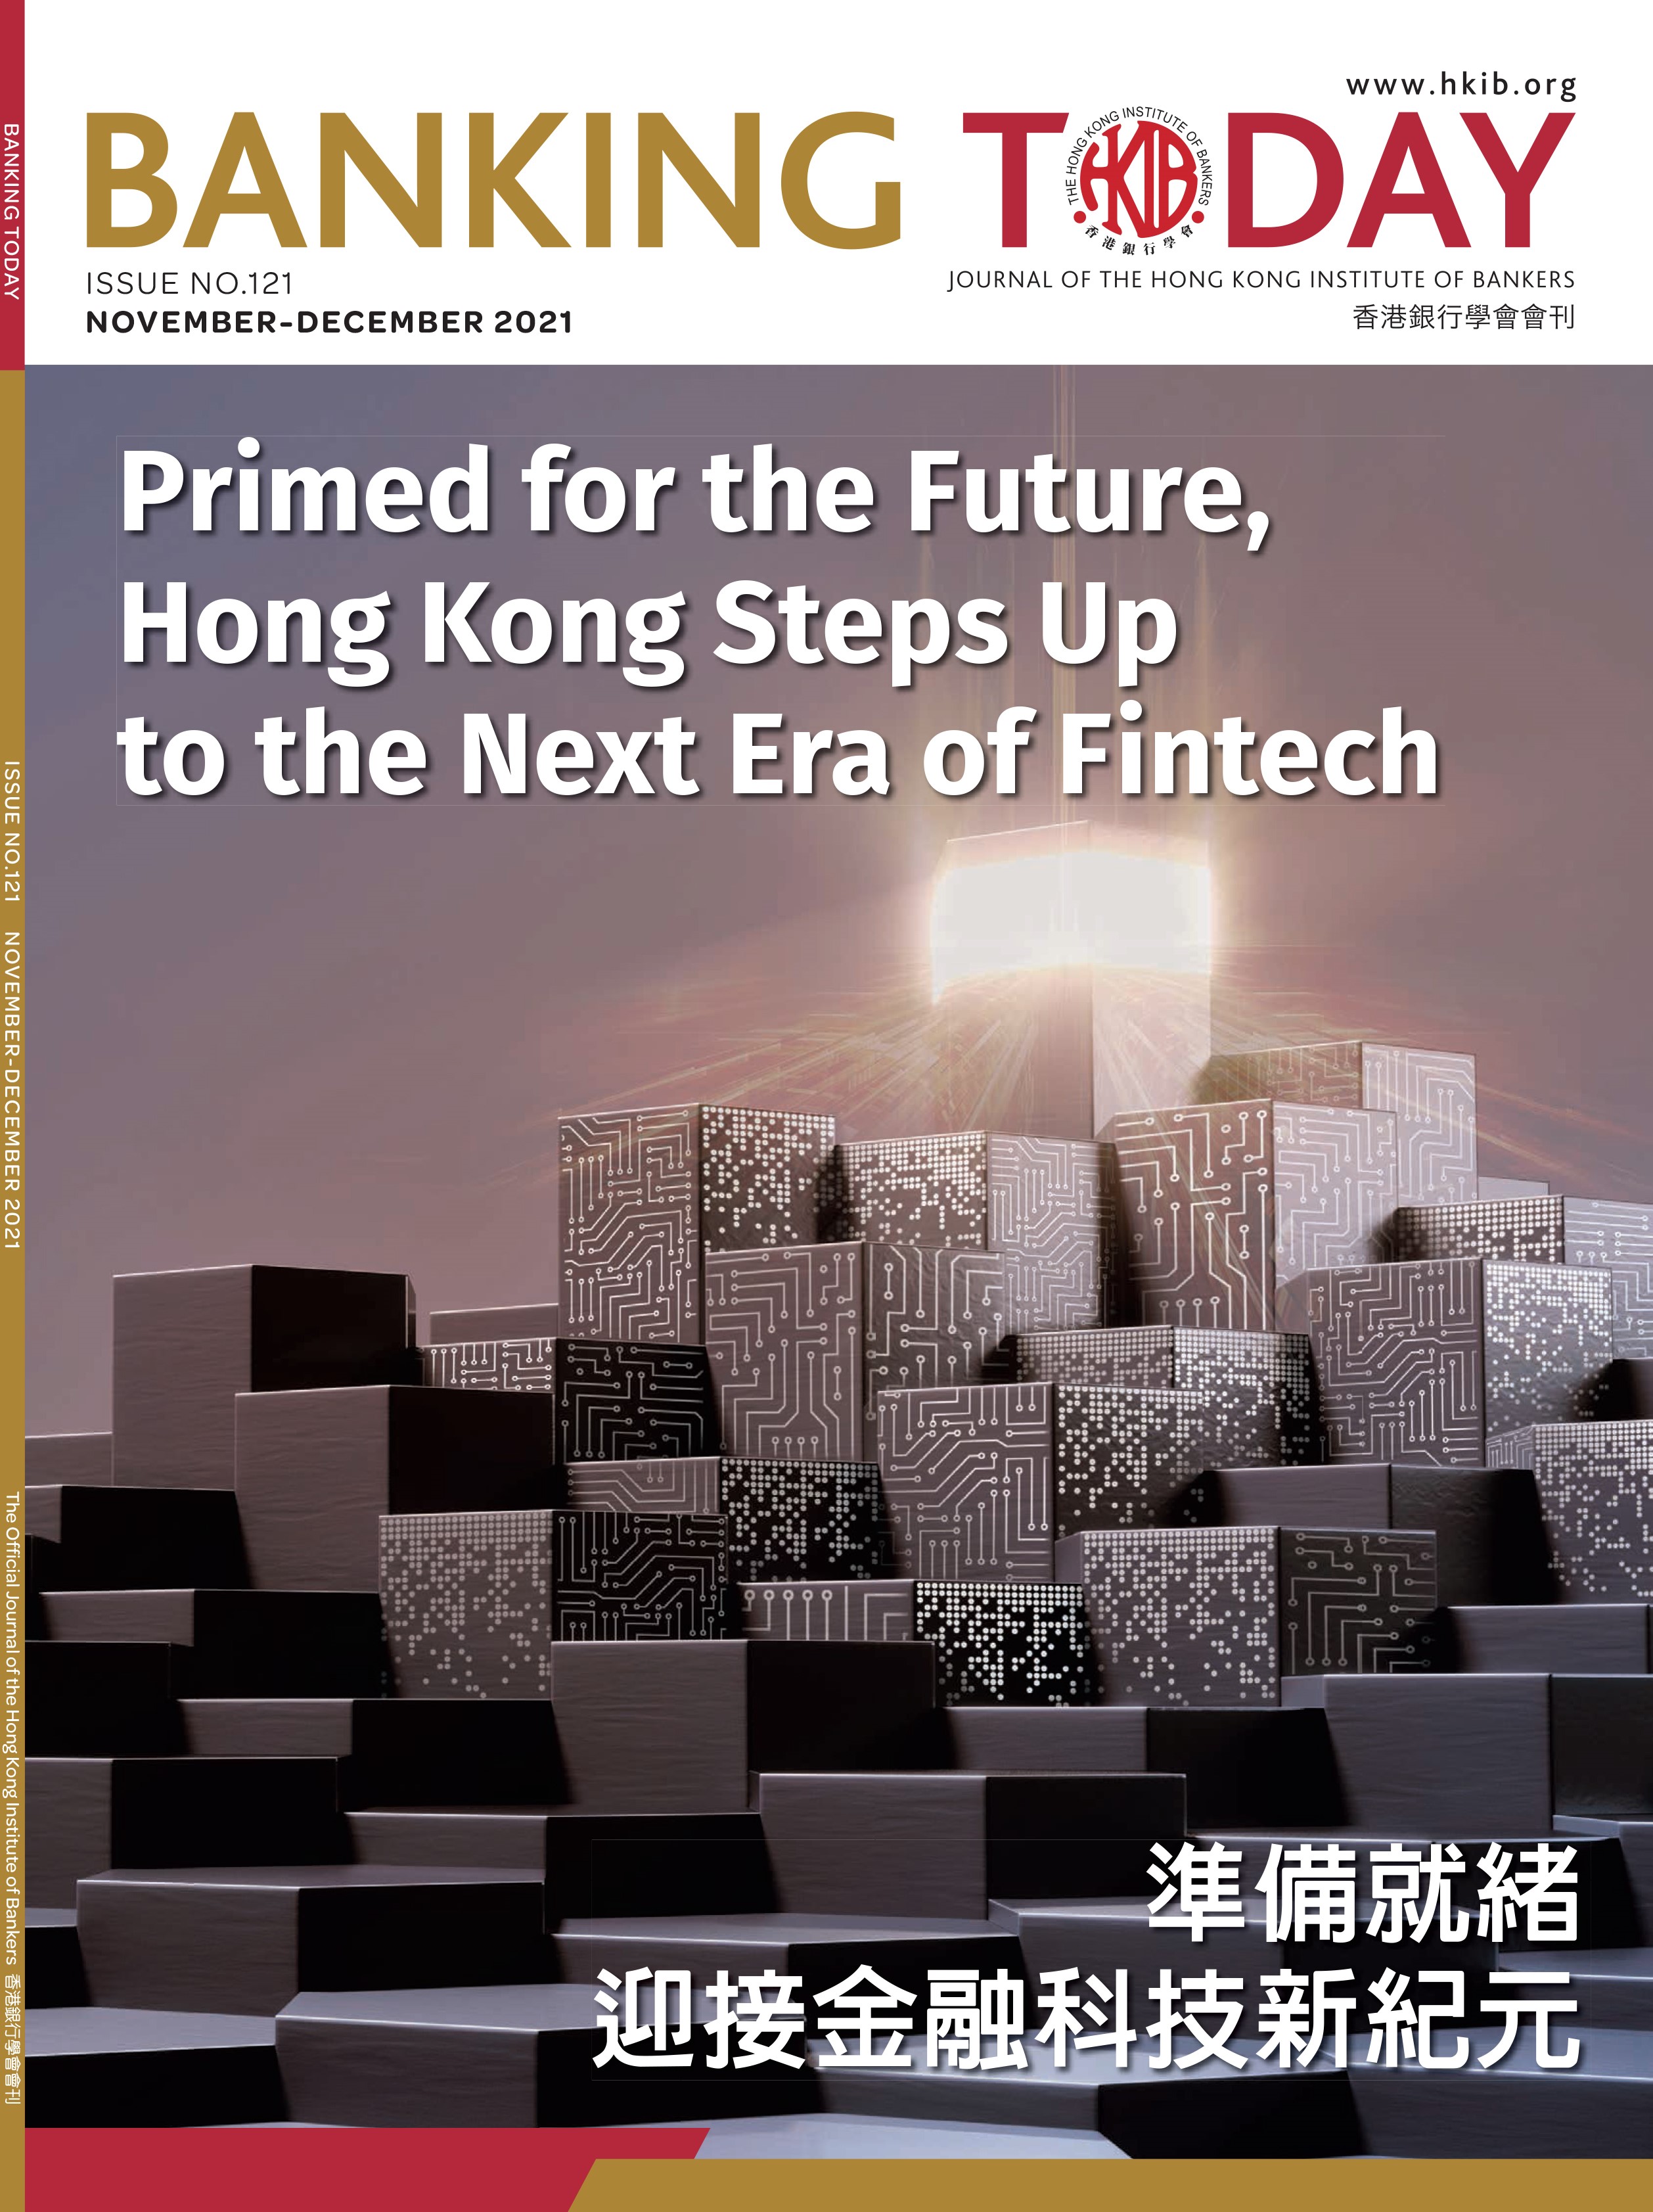 Primed for the Future, Hong Kong Steps Up to the Next Era of Fintech